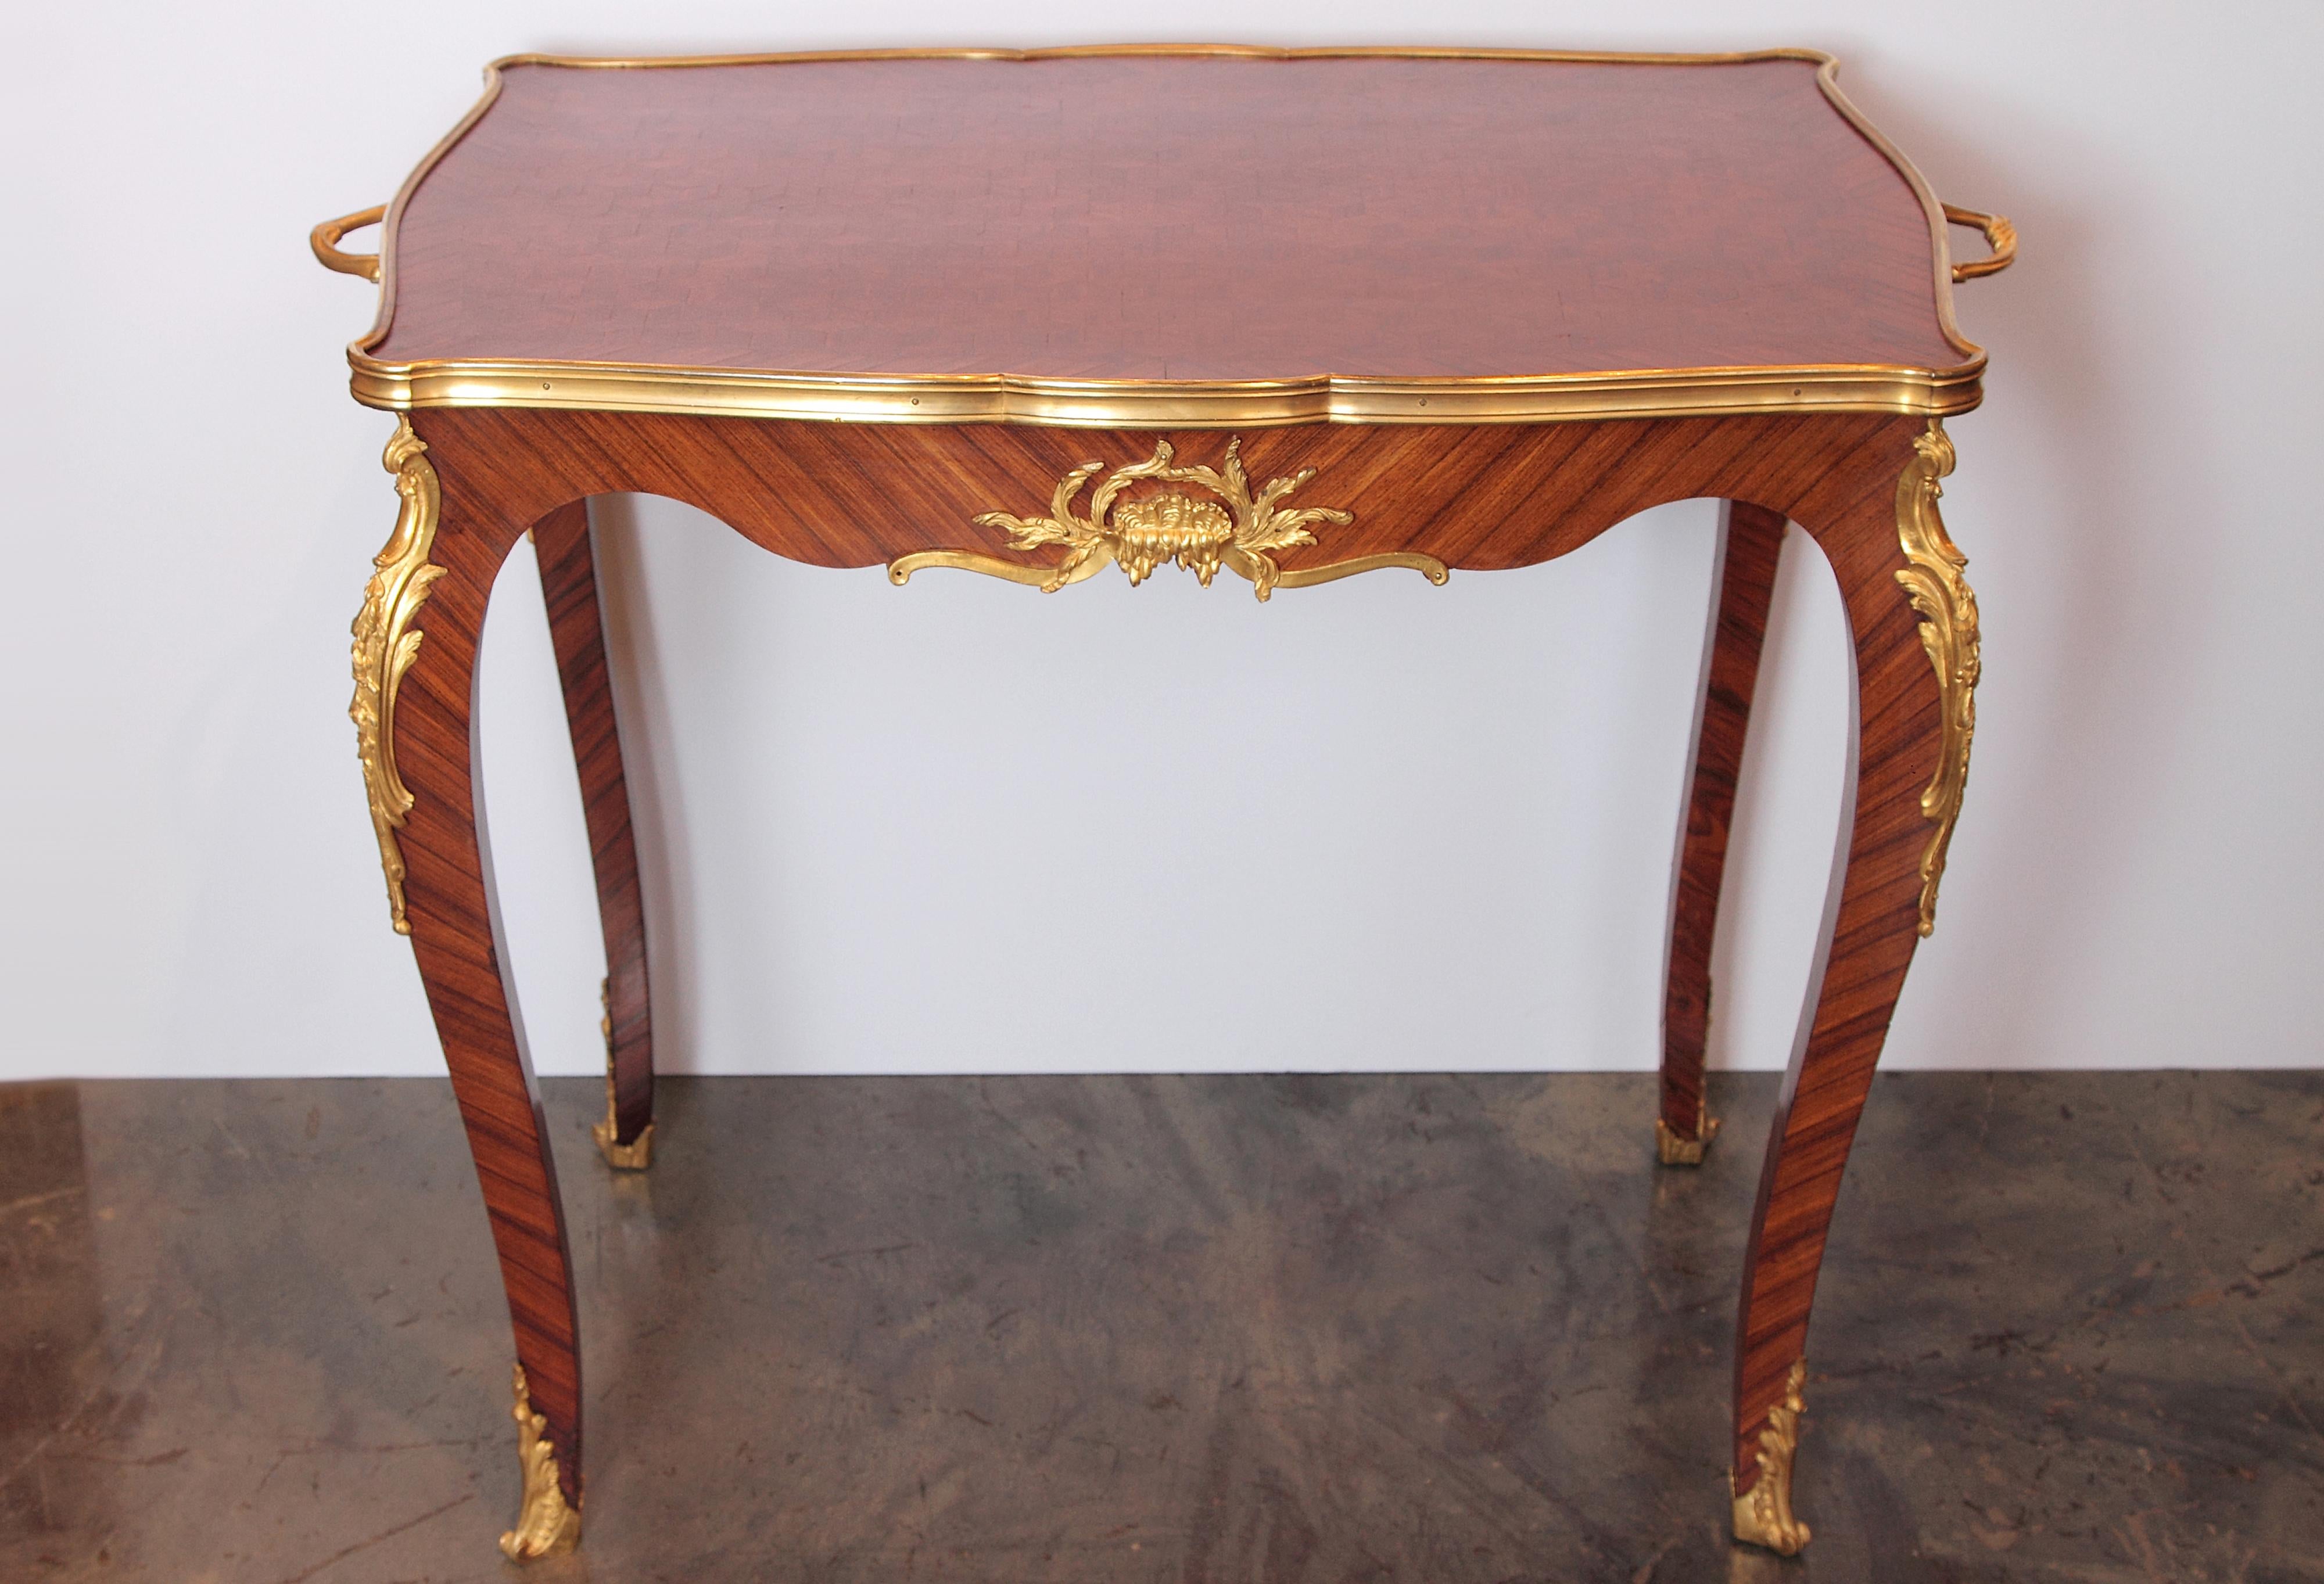 Late 19th century to turn of the 20th century French Louis XVI tray table. Kingwood and fine gilt bronze detail. Attributed to F. Linke .